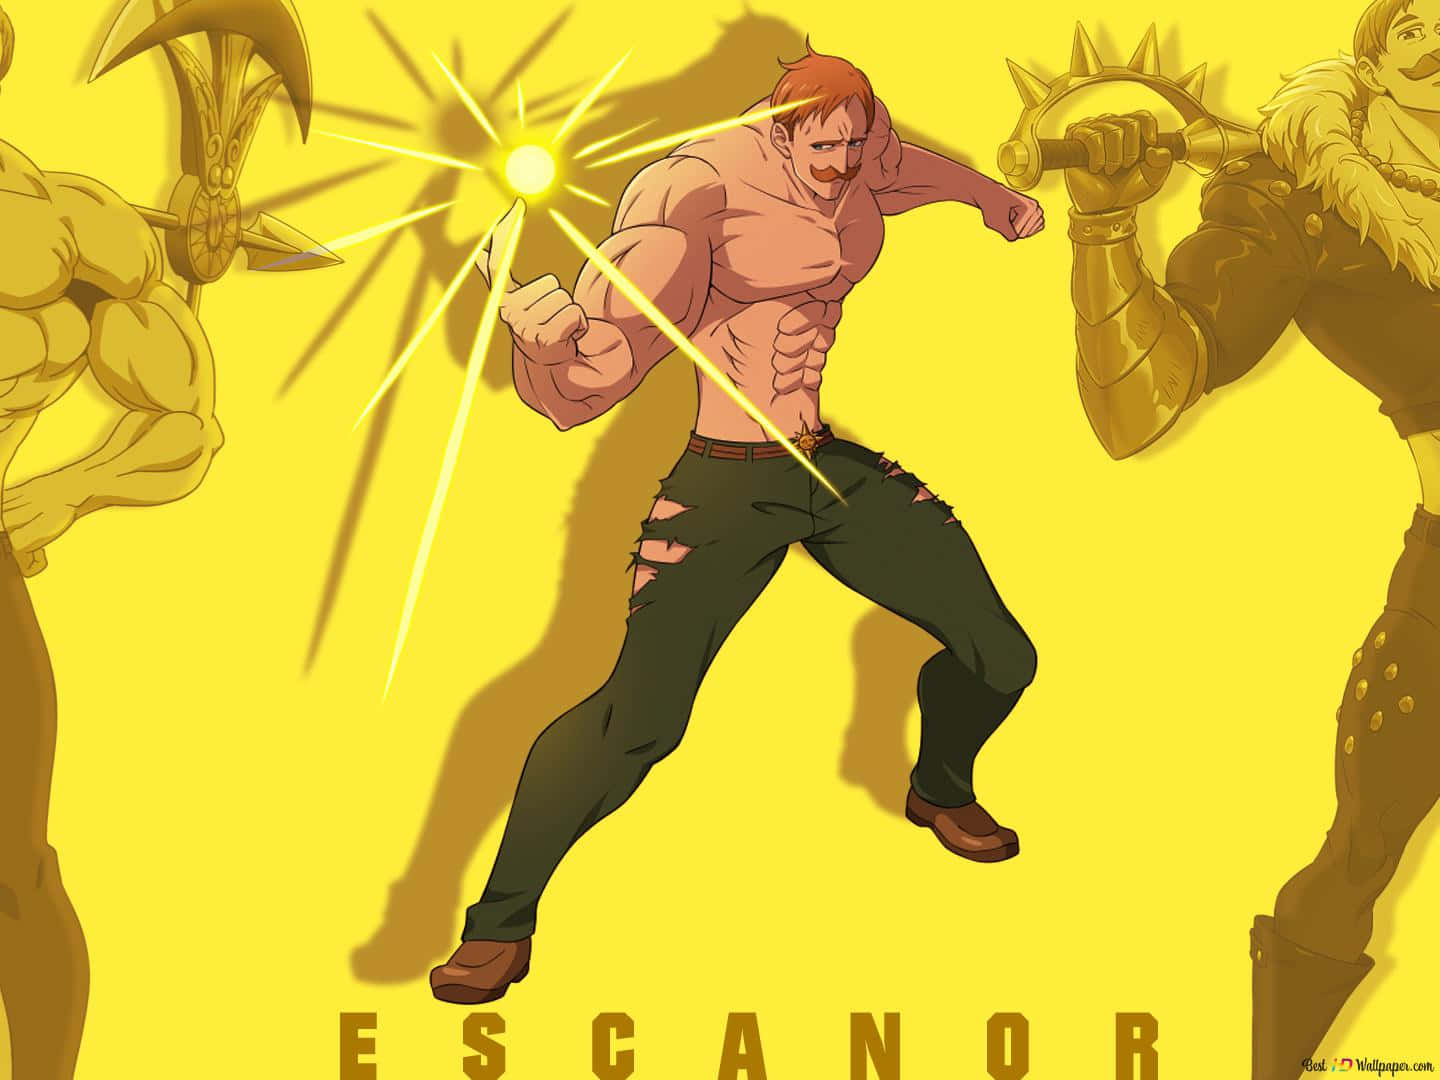 An intimidatingly powerful ability lies within Escanor